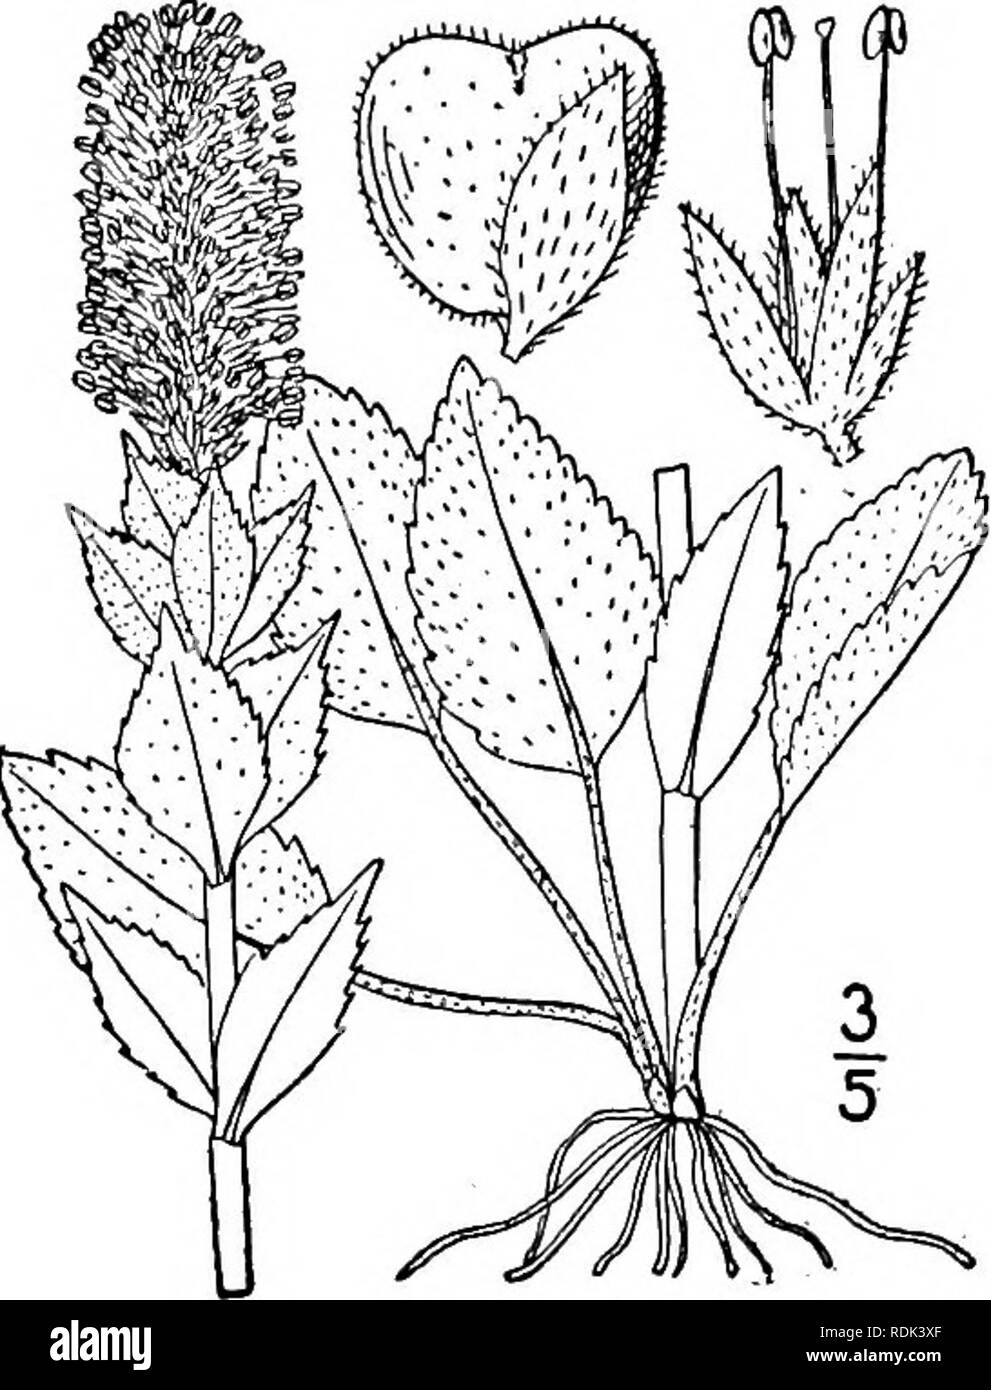 . An illustrated flora of the northern United States, Canada and the British possessions, from Newfoundland to the parallel of the southern boundary of Virginia, and from the Atlantic Ocean westward to the 102d meridian. Botany; Botany. Genus 22. FIGWORT FAMILY. 199 2. Synthyris rubra (Hook.) Benth. Western Synthyris. Fig. 3795. Gymnandra rubra Hook. Fl. Bor. Amer. 2: 103. pi. 172. 1838. Synthyris rubra Benth. in DC. Prodr. 10: 455. 1846. Wulfenia rubra Greene, Erythea 2: 83. 1894. Besseya rubra Rydberg, Bull. Torr. Club 30: 280. 1903. Similar to the preceding species but lower, pubescent or t Stock Photo